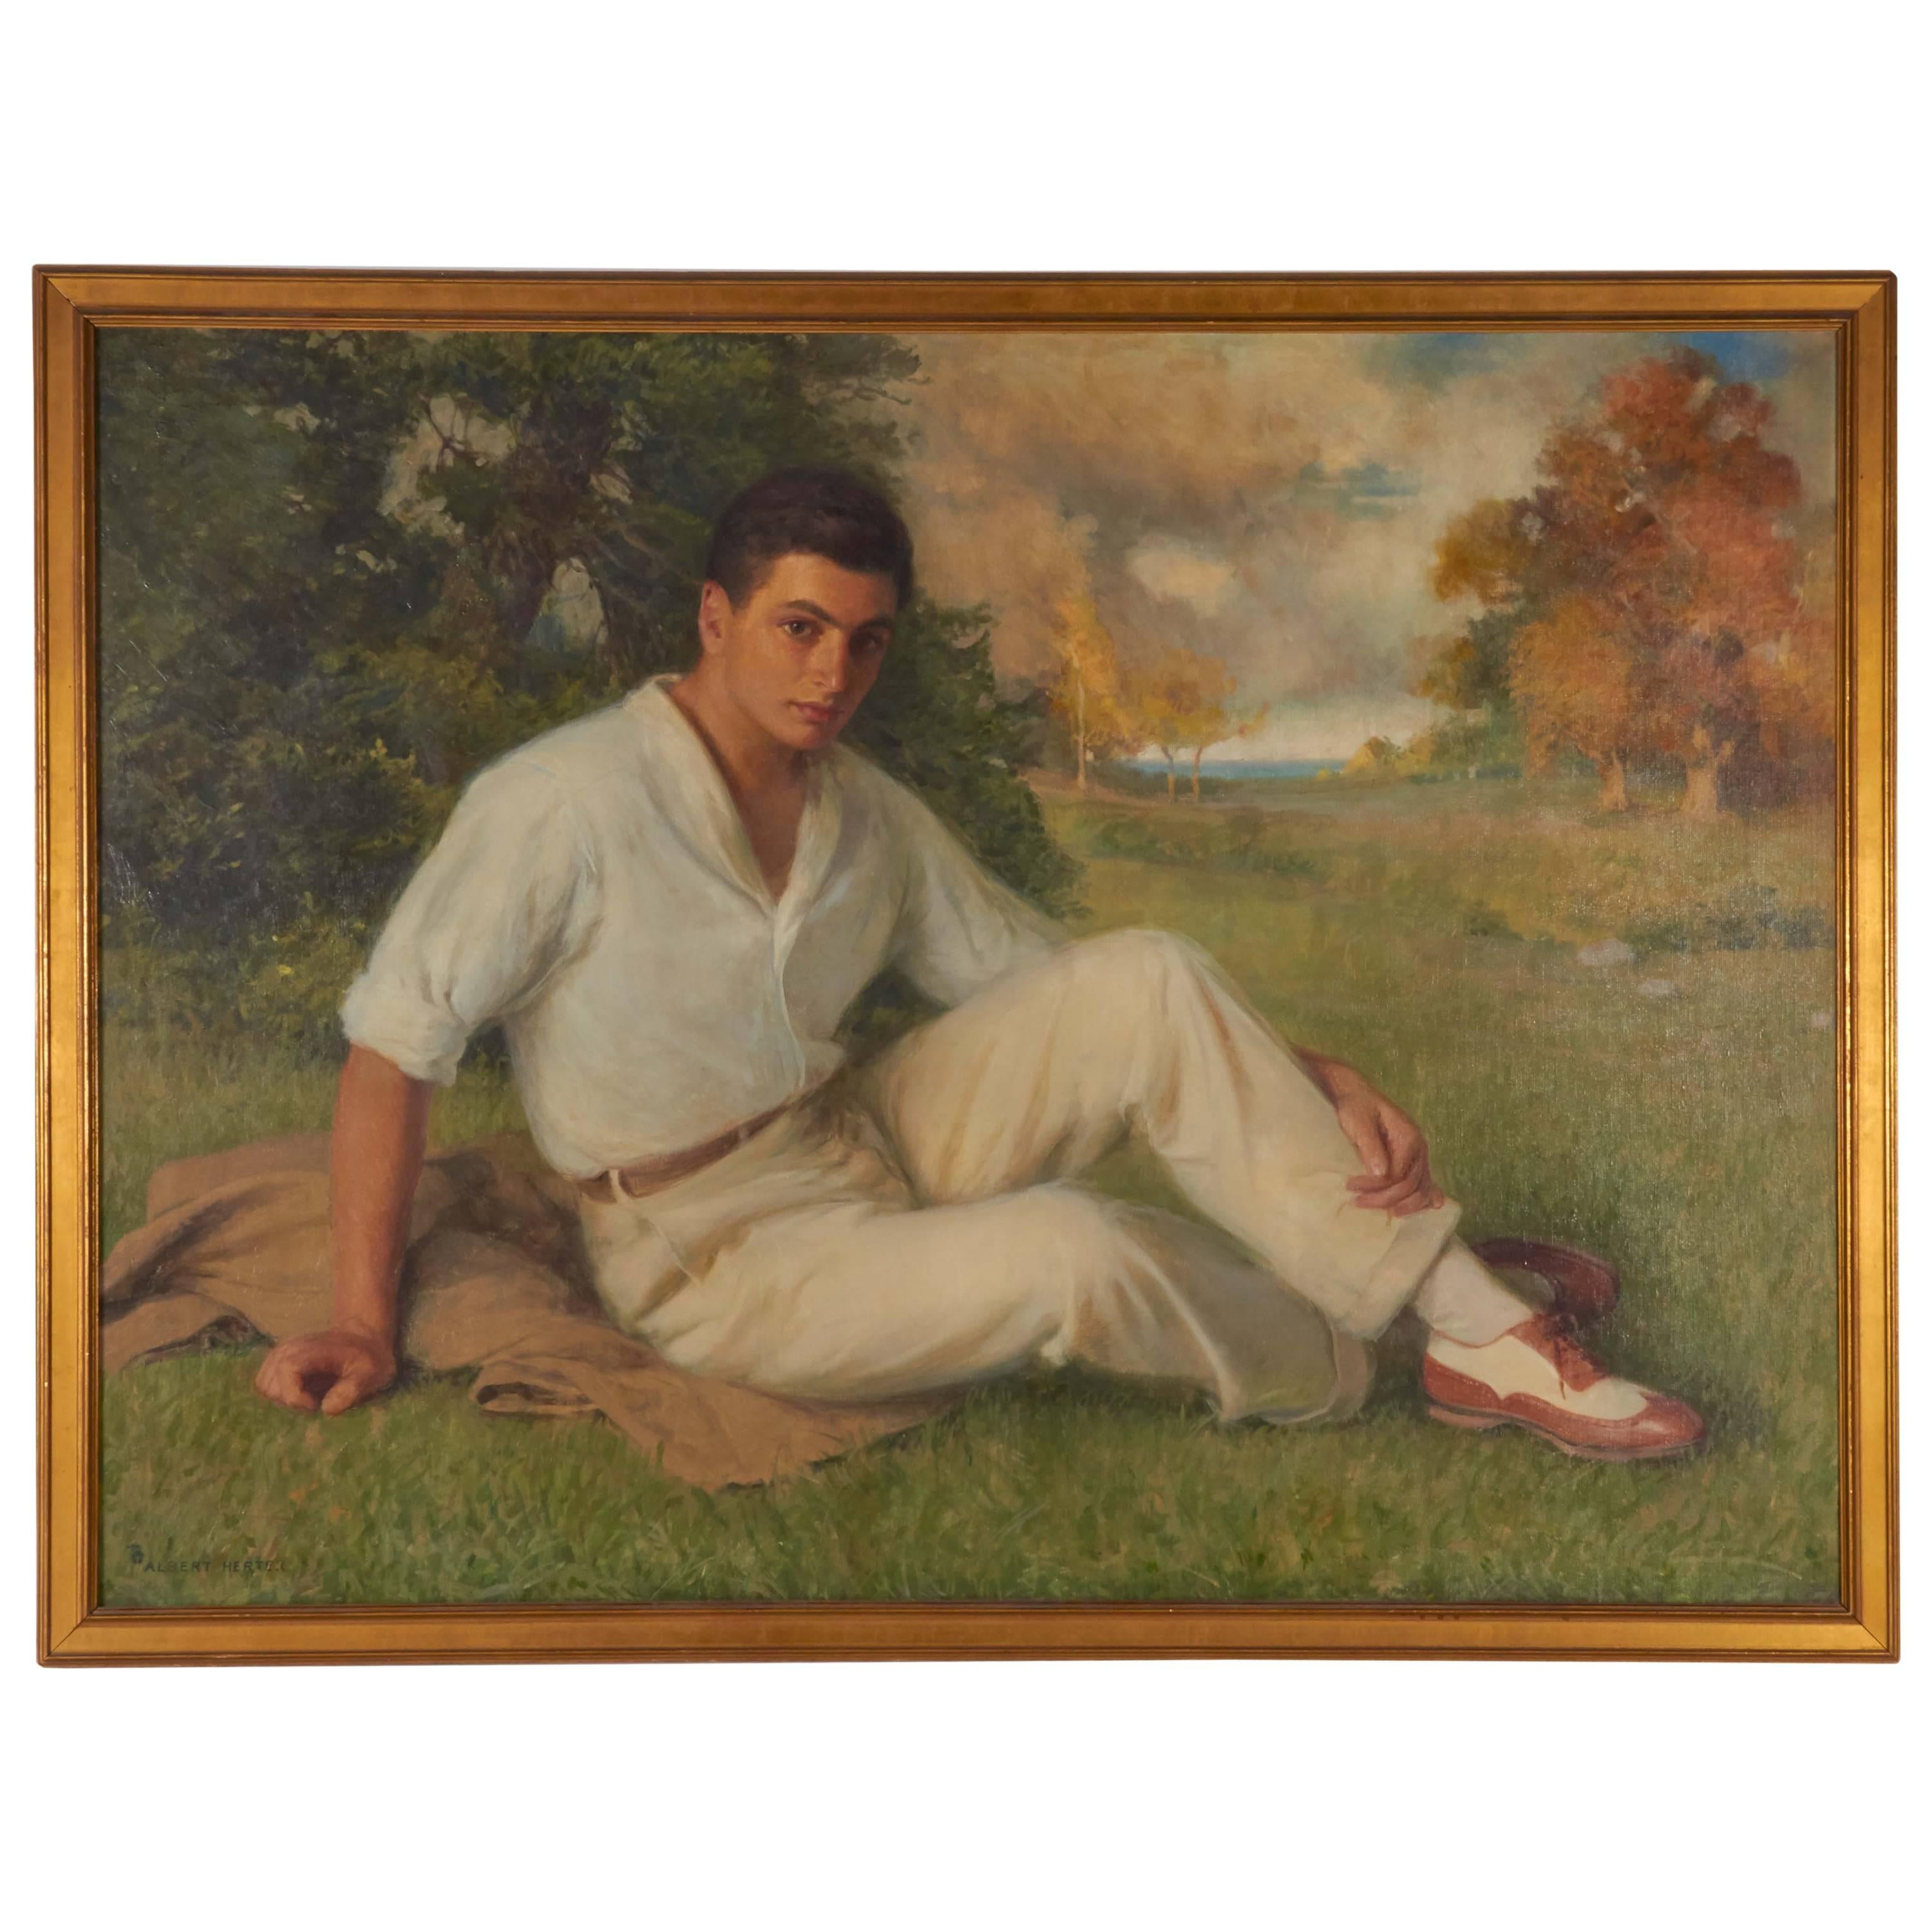 Portrait of a Young Man in His Sunday Finest, Albert Herter